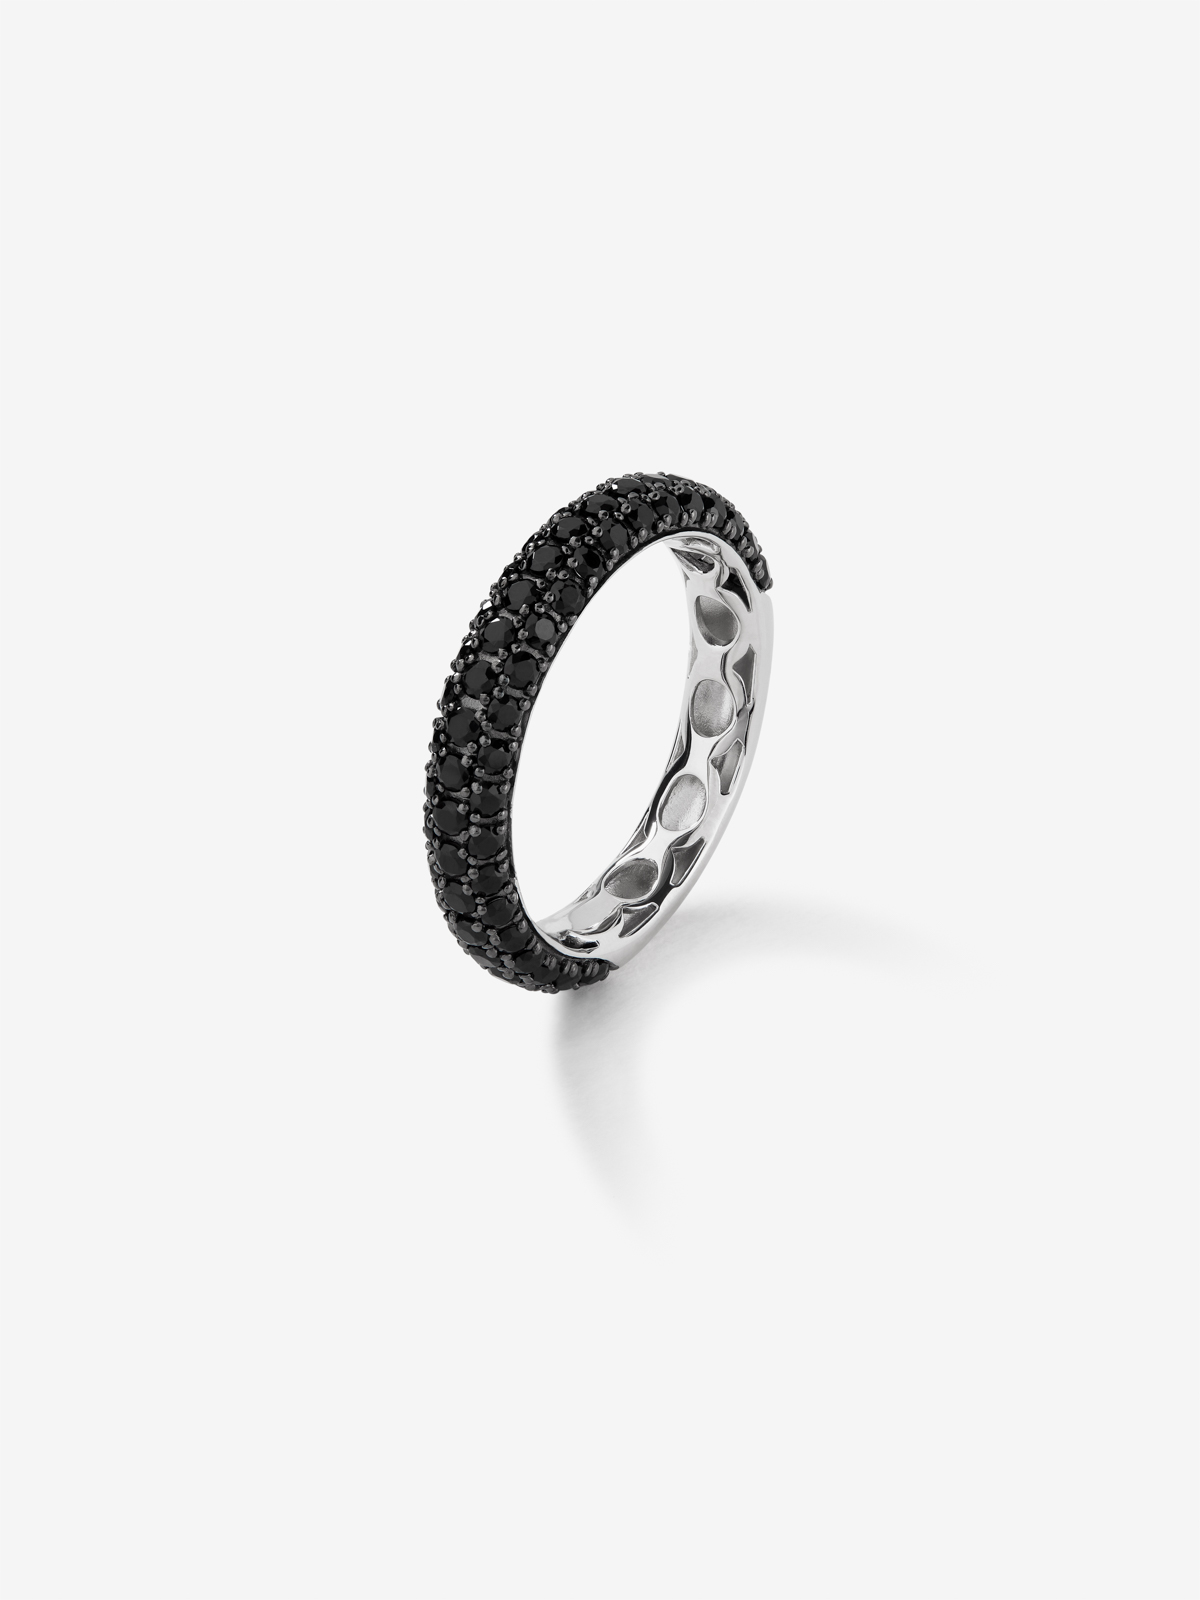 925 Silver Band Ring with Spinel Stones